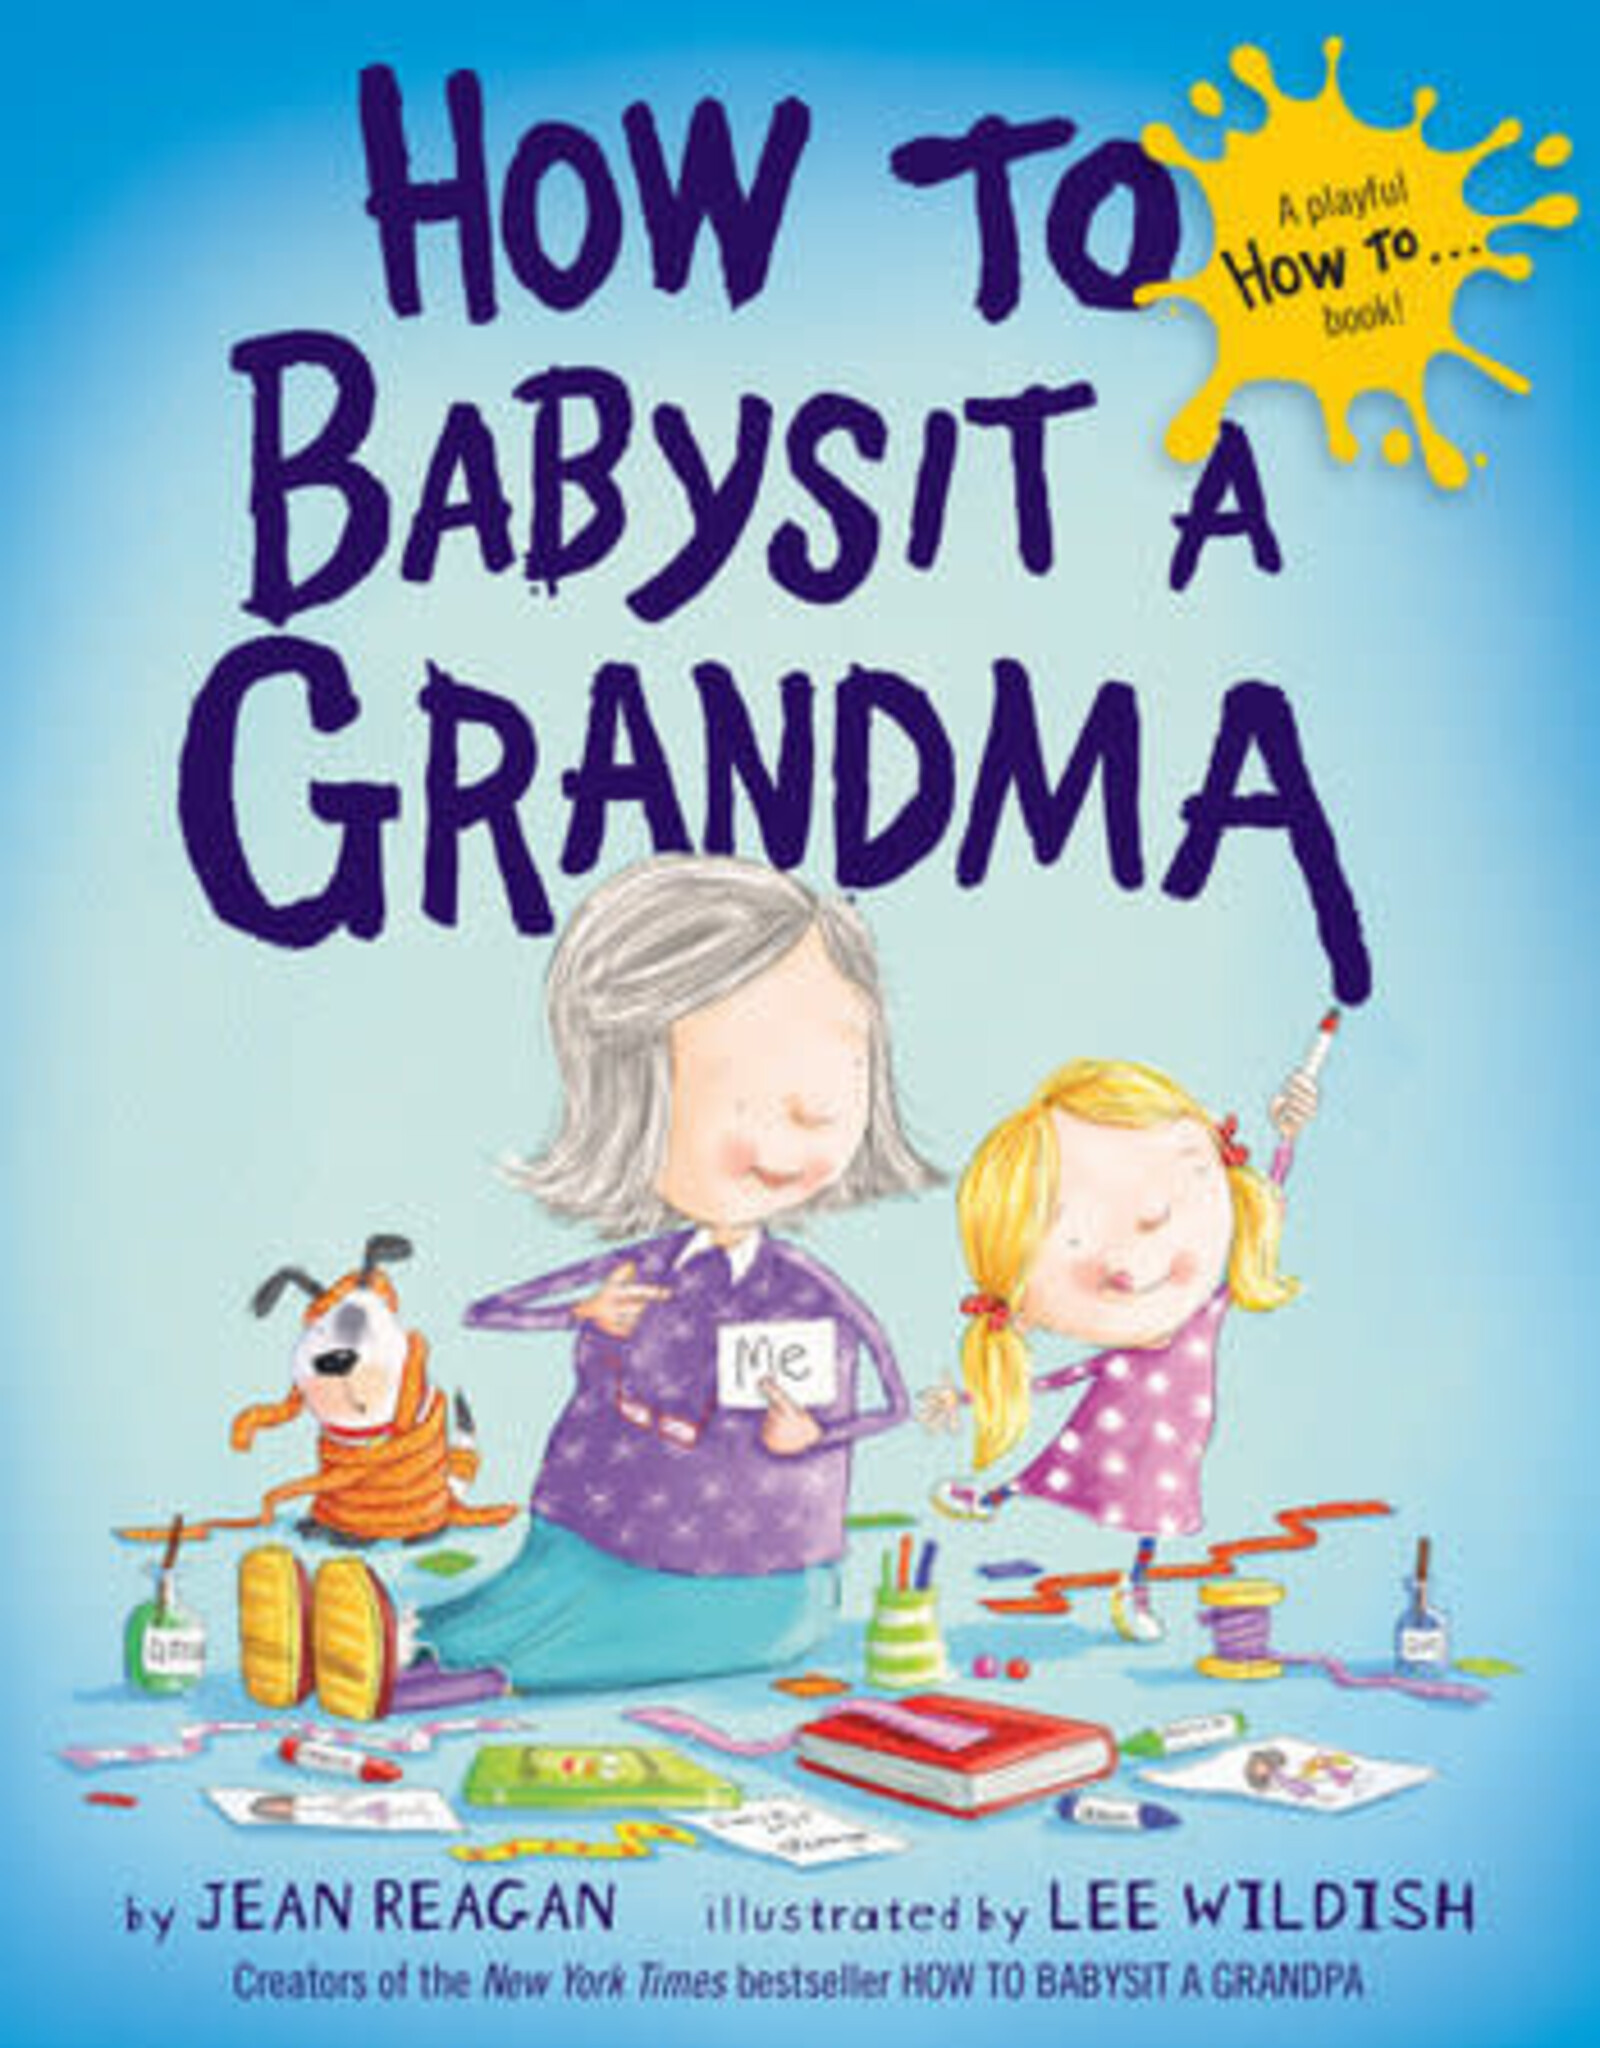 BOOK PUBLISHERS HOW TO BABYSIT A GRANDMA